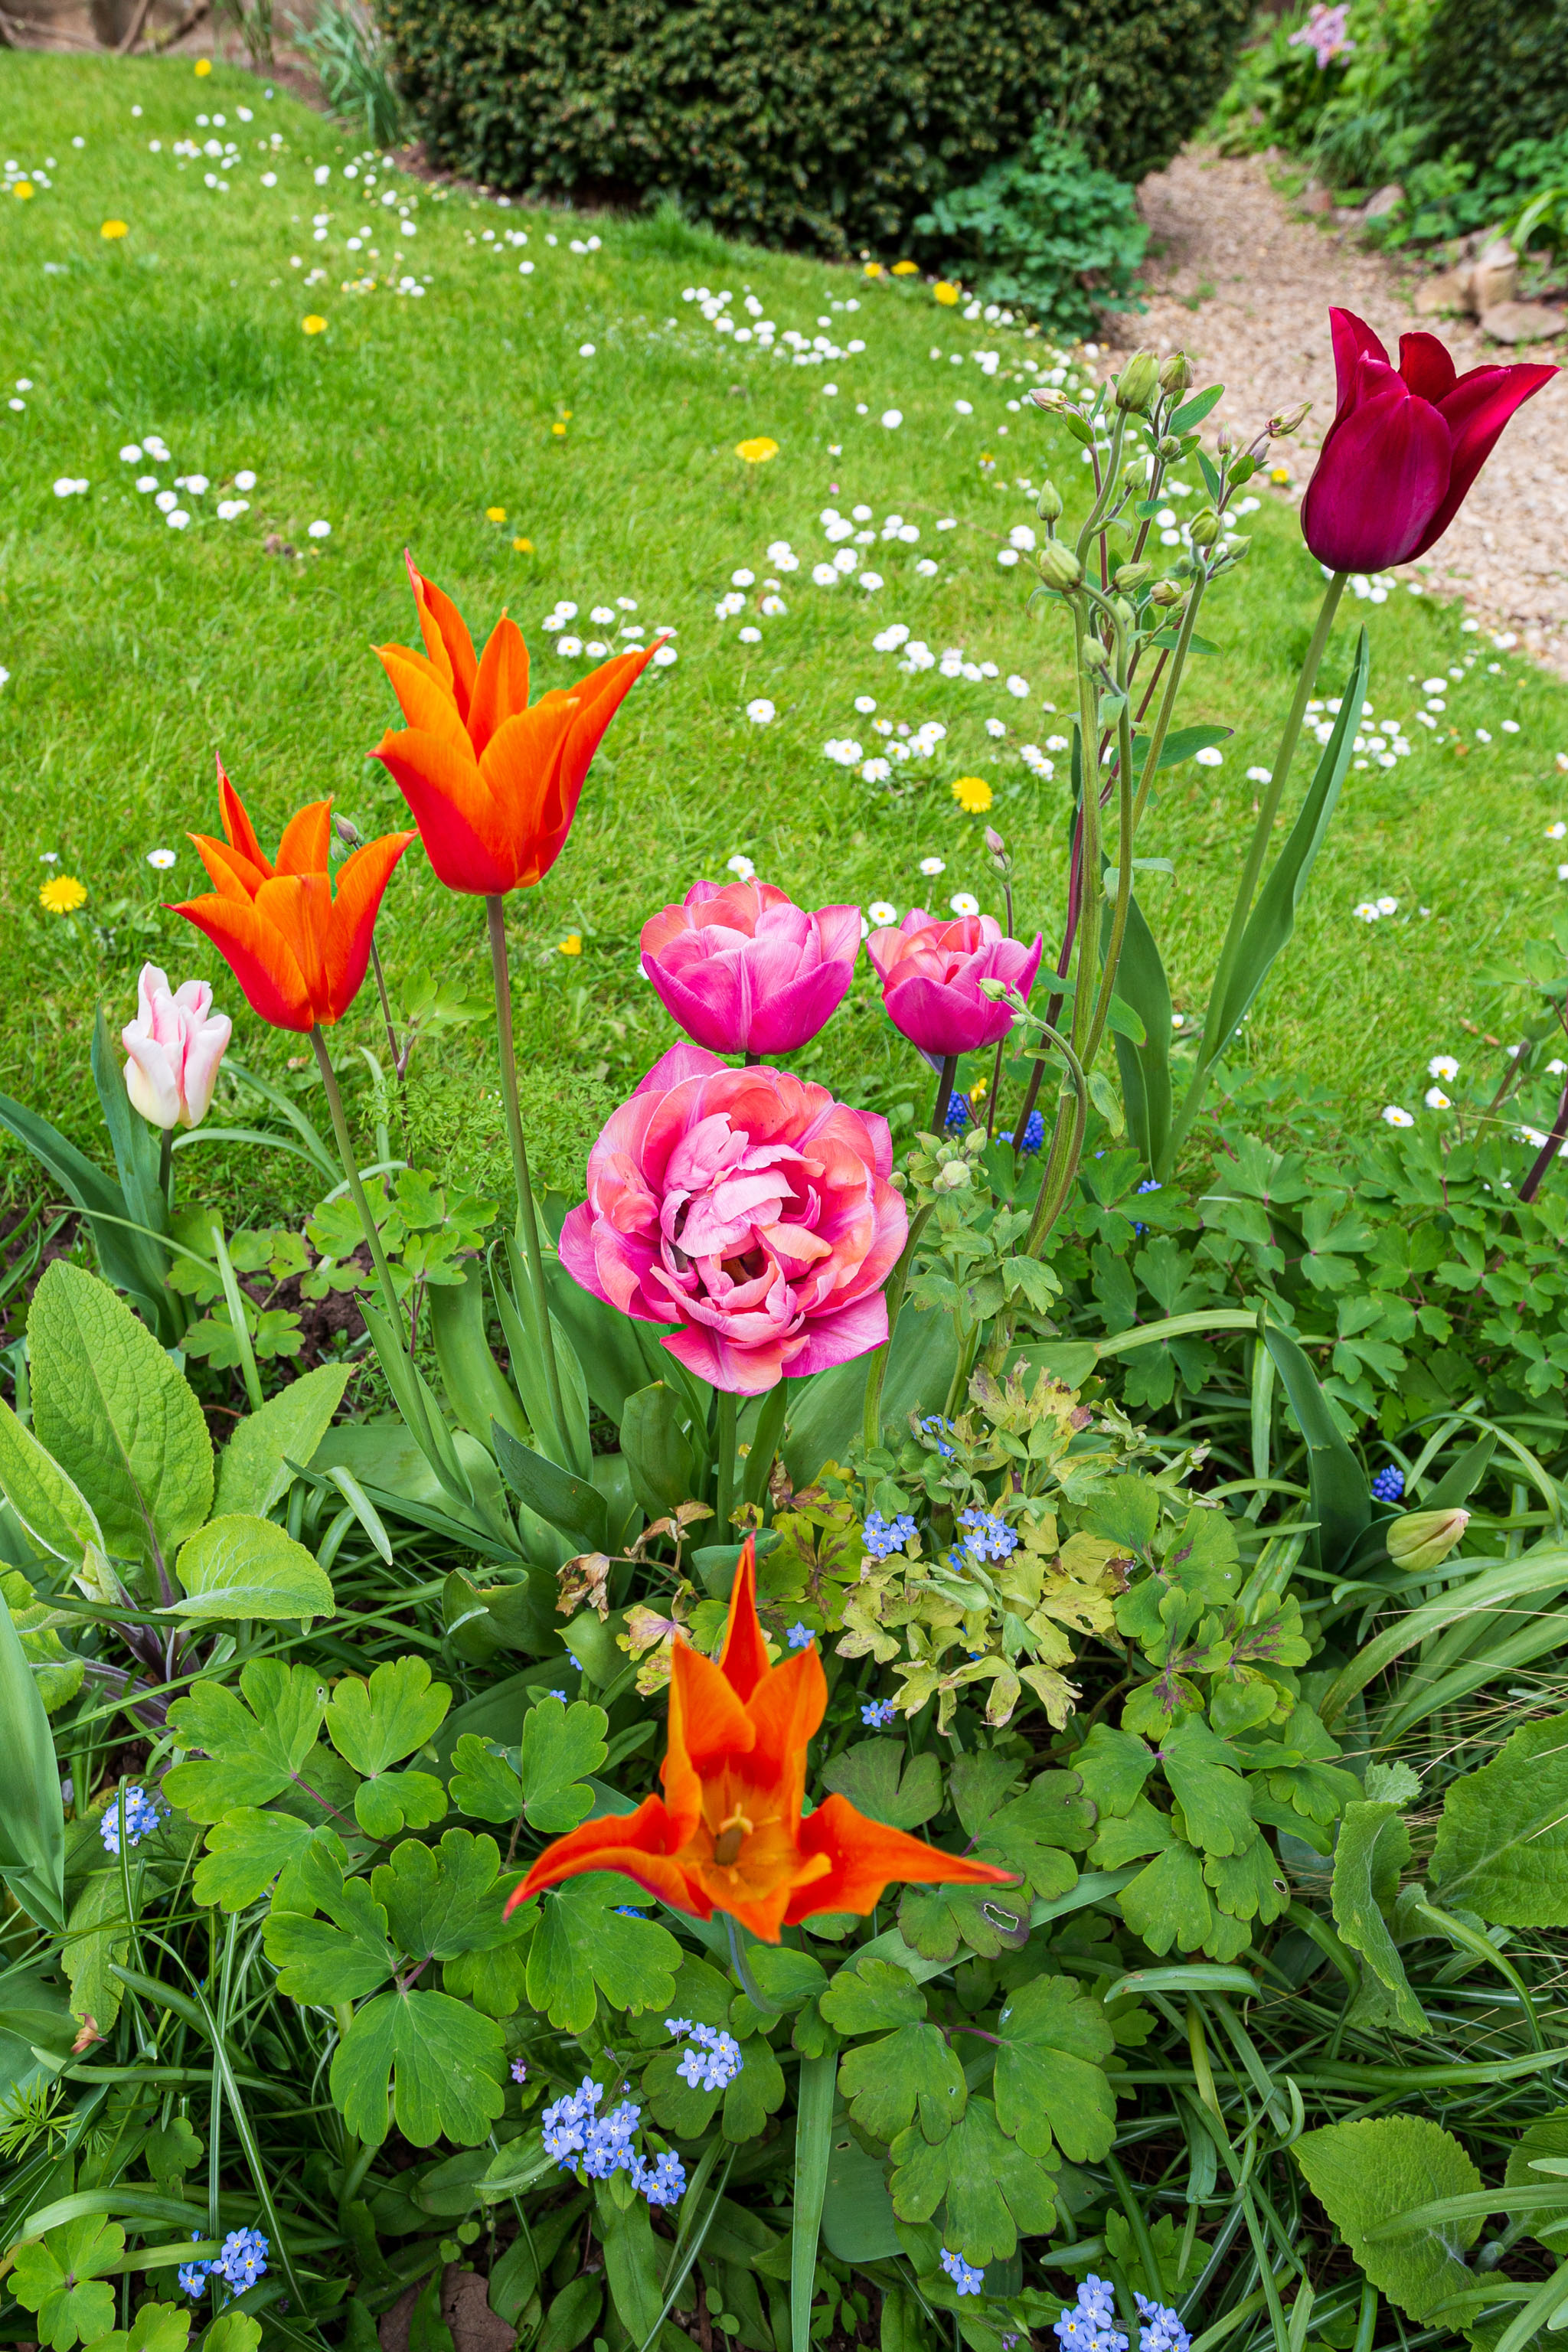 Colourful
Continuing our minor theme of flowers and gardens, here's some from the Albert Lodge garden.
